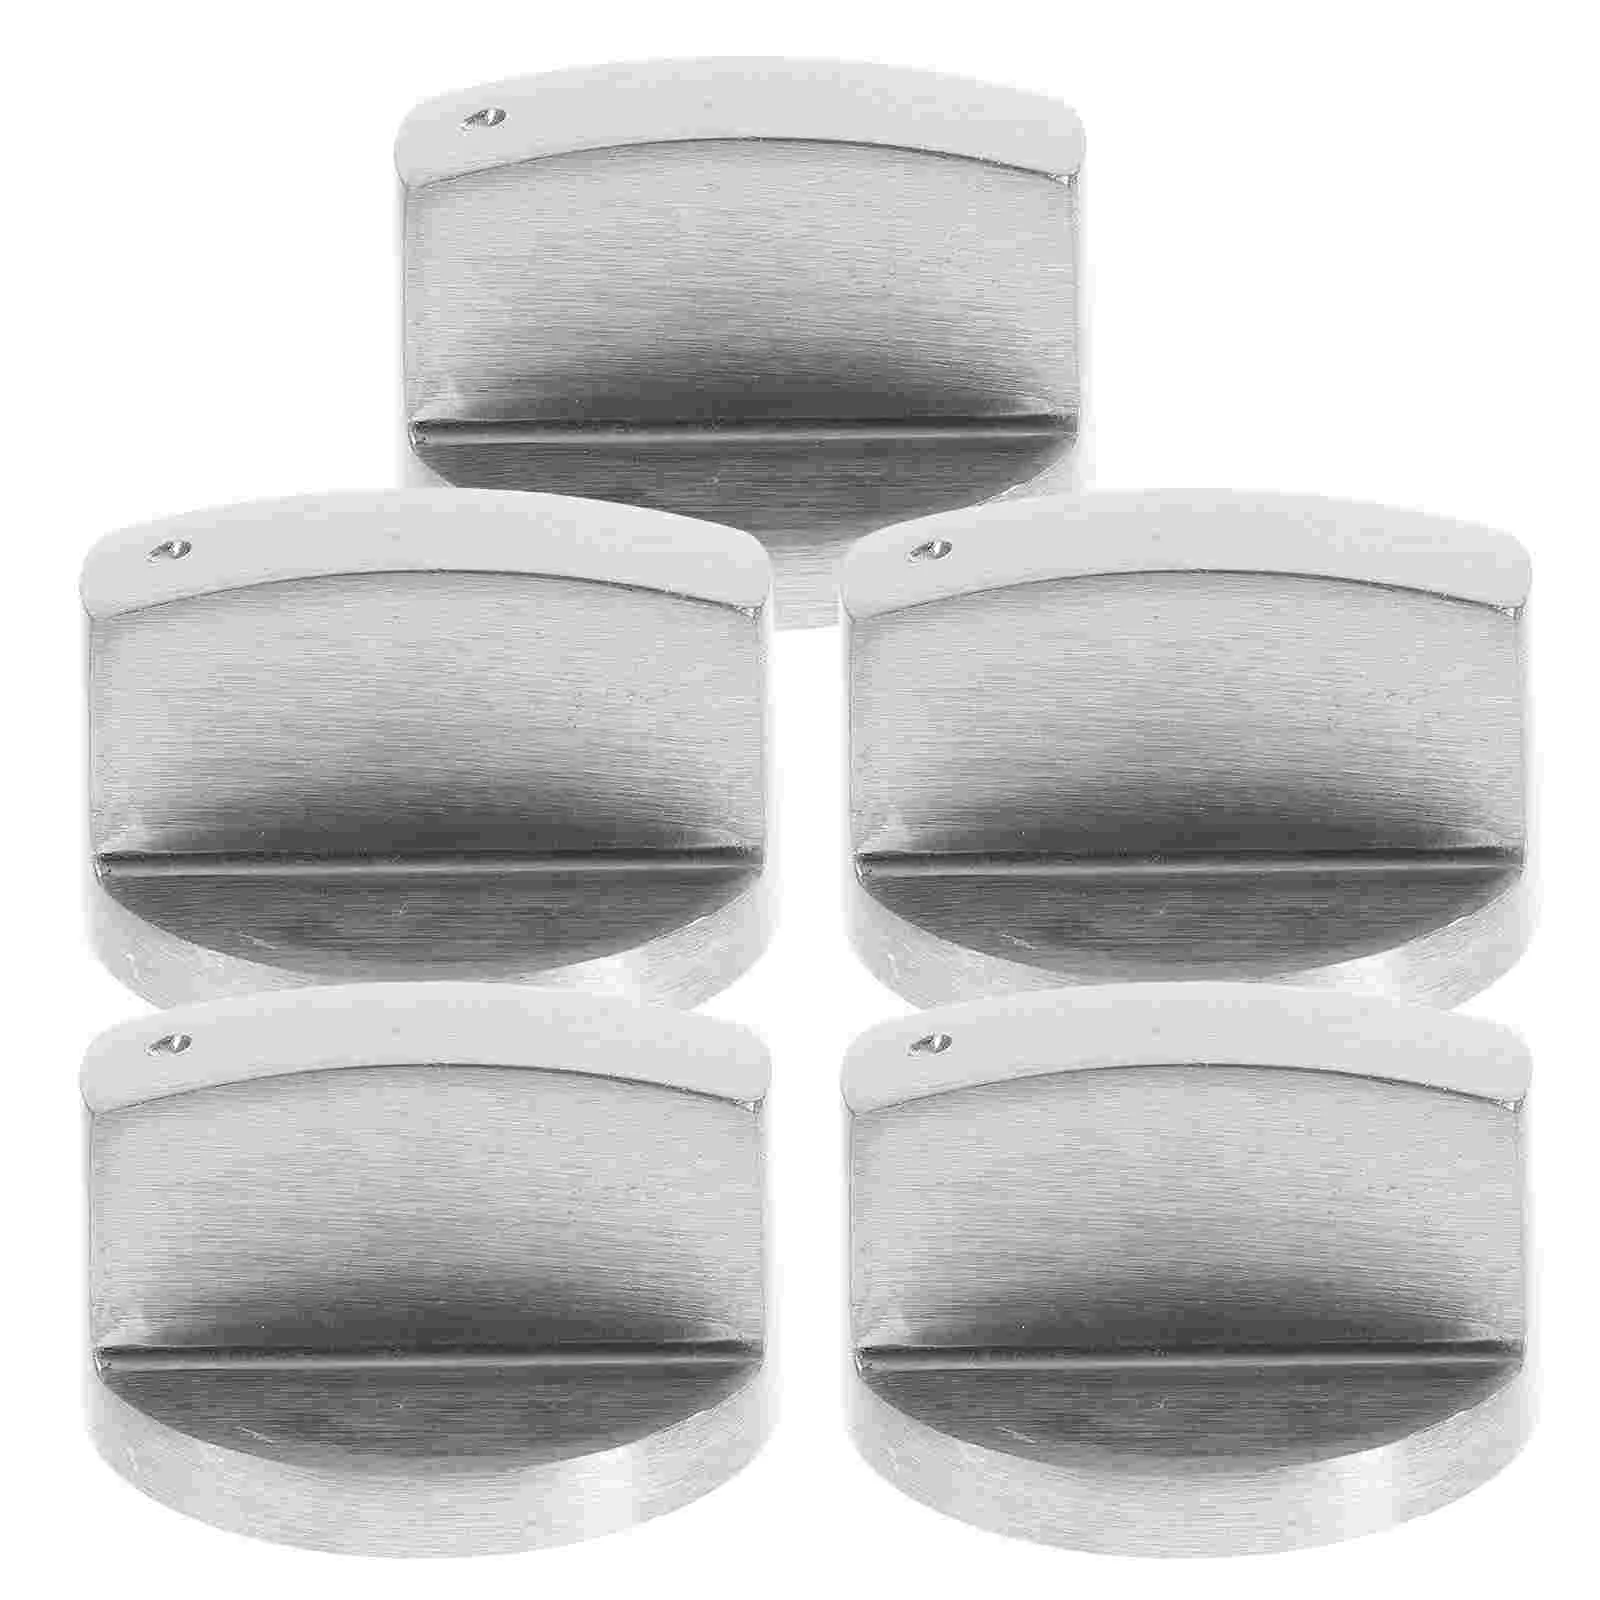 

5 Pcs Replacement Furnace Knob Stainless Steel Gas Stove Knobs Control Metal Oven Replacements Range